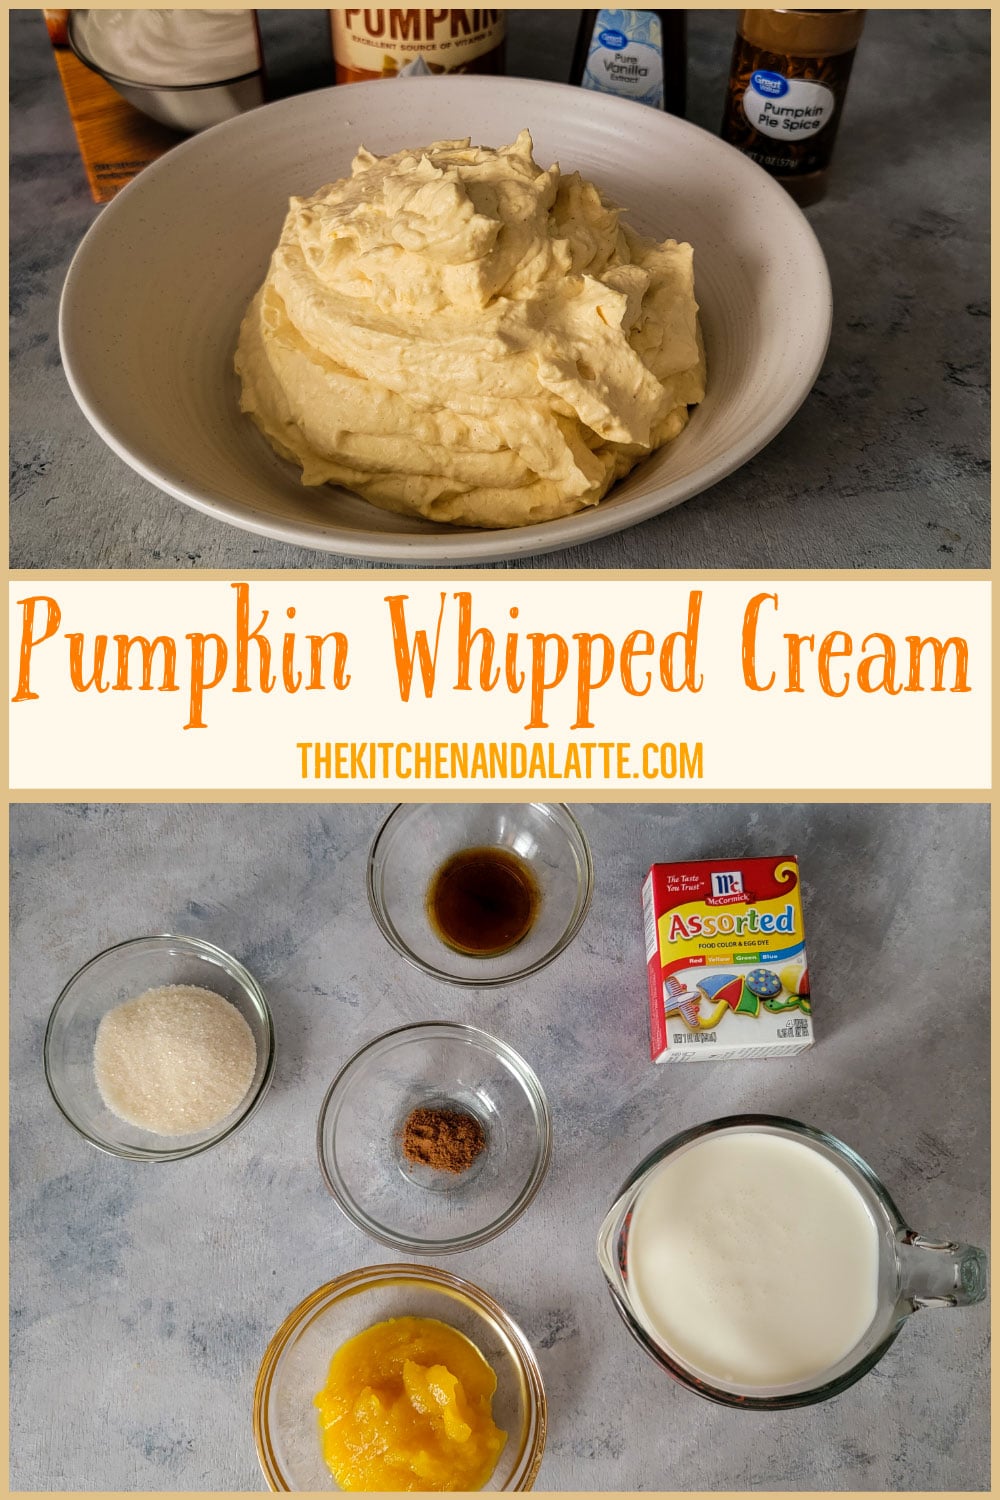 Pinterest image text pumpkin whipped cream. 2 pictures 1 is pumpkin whipped cream in a bowl. Other image is the ingredients in prep bowls.